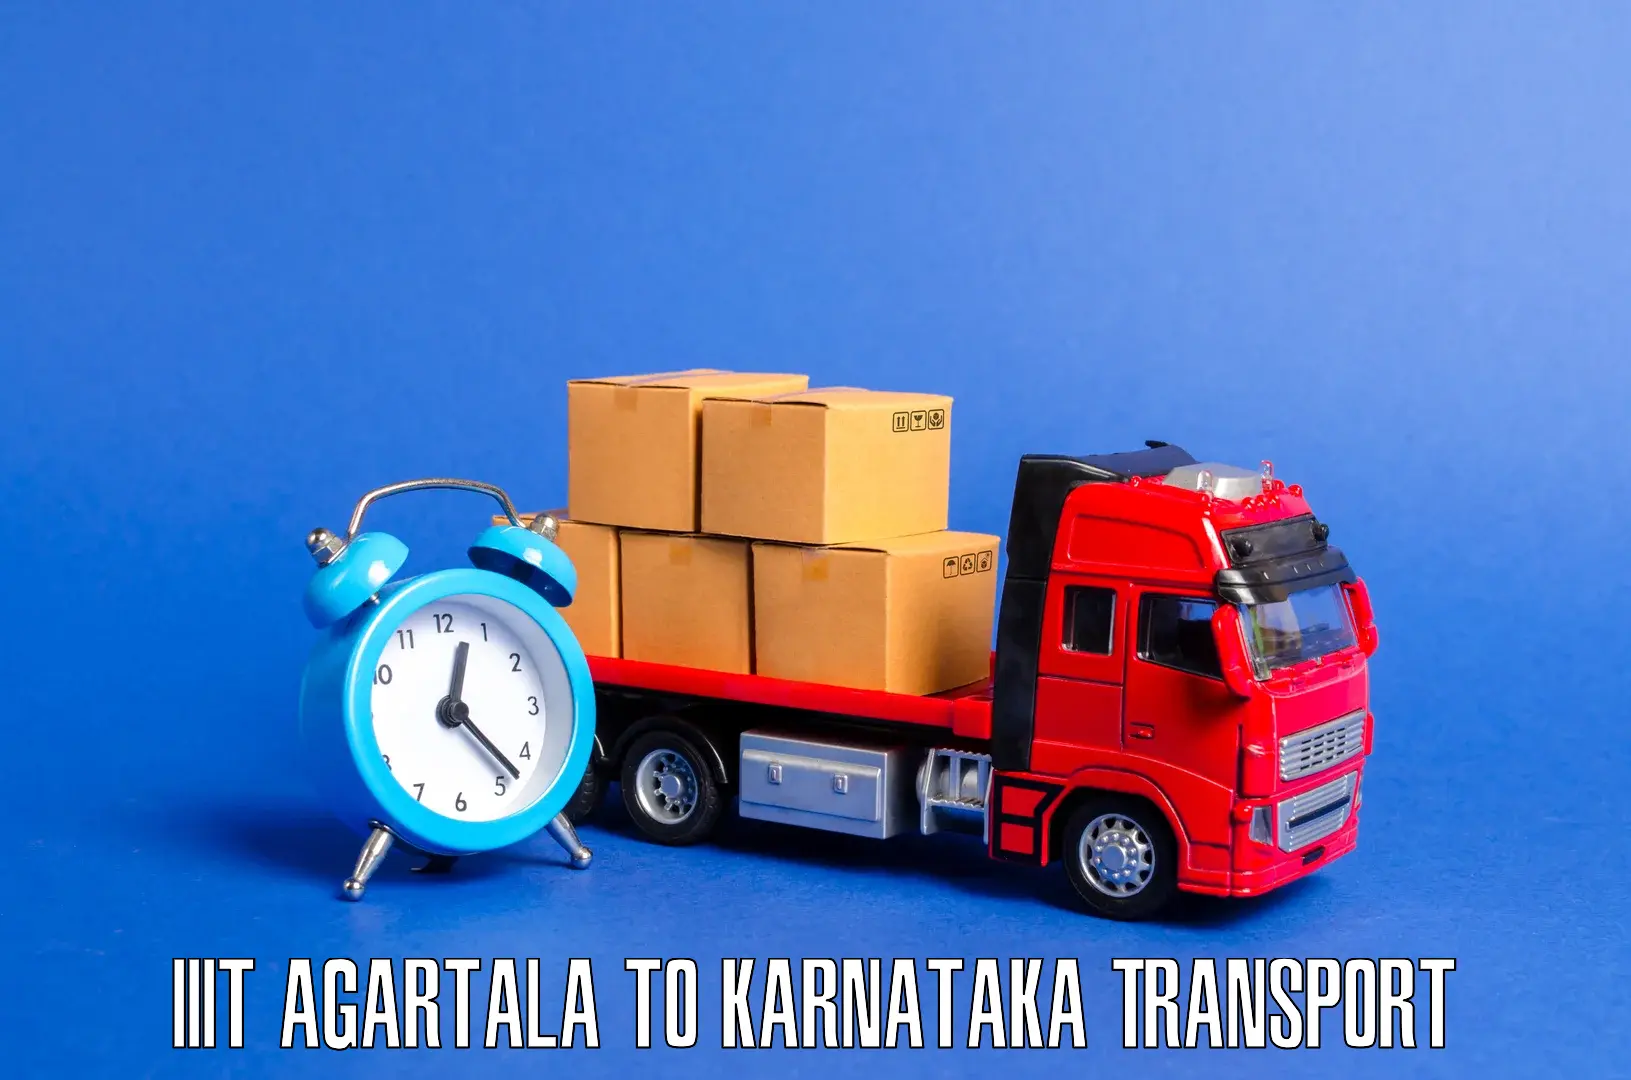 Road transport online services IIIT Agartala to Manipal Academy of Higher Education